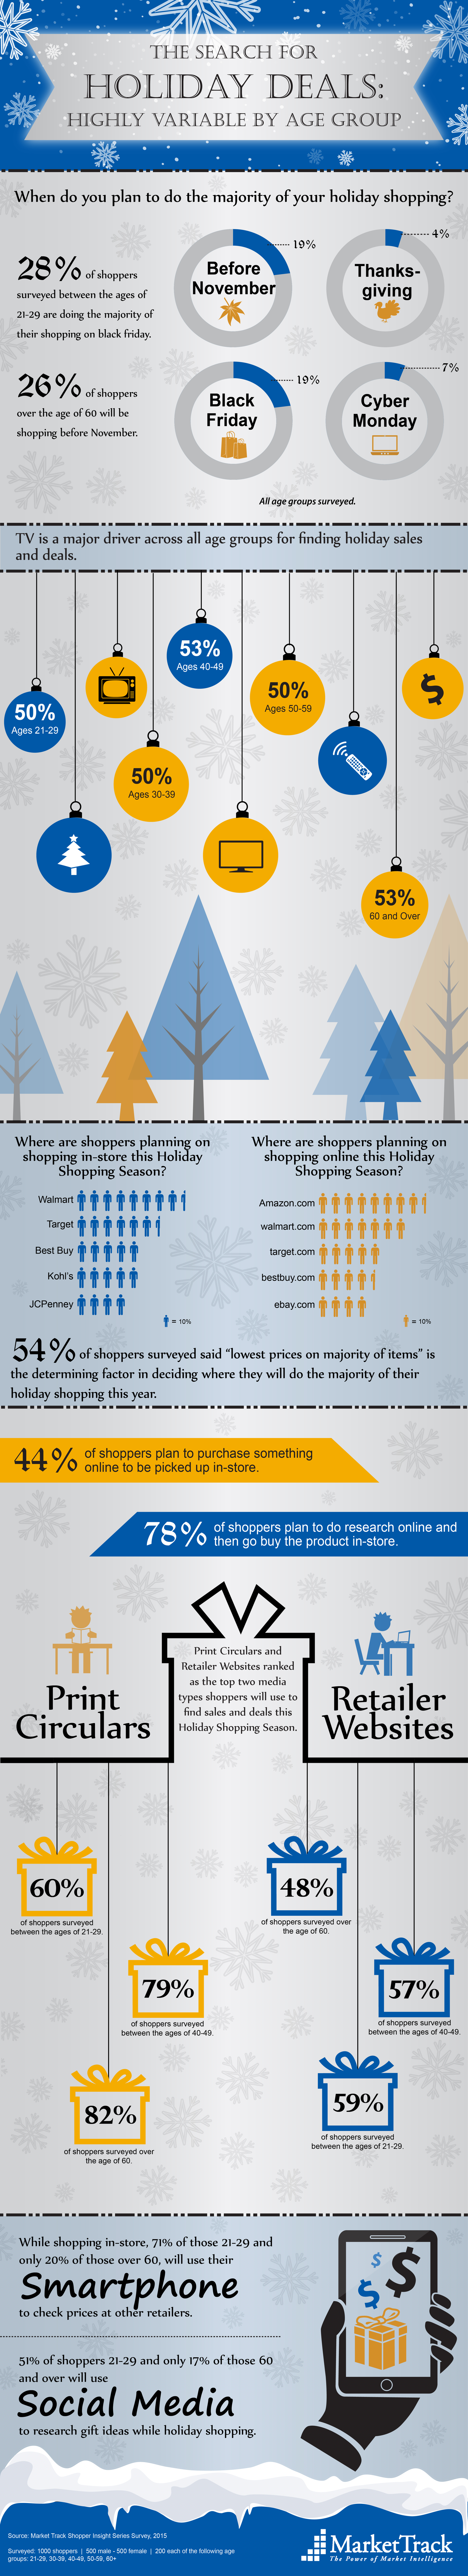 Market Track Survey Reveals That Searching For 2015 Holiday Deals Varies Greatly By Age Group Business Wire